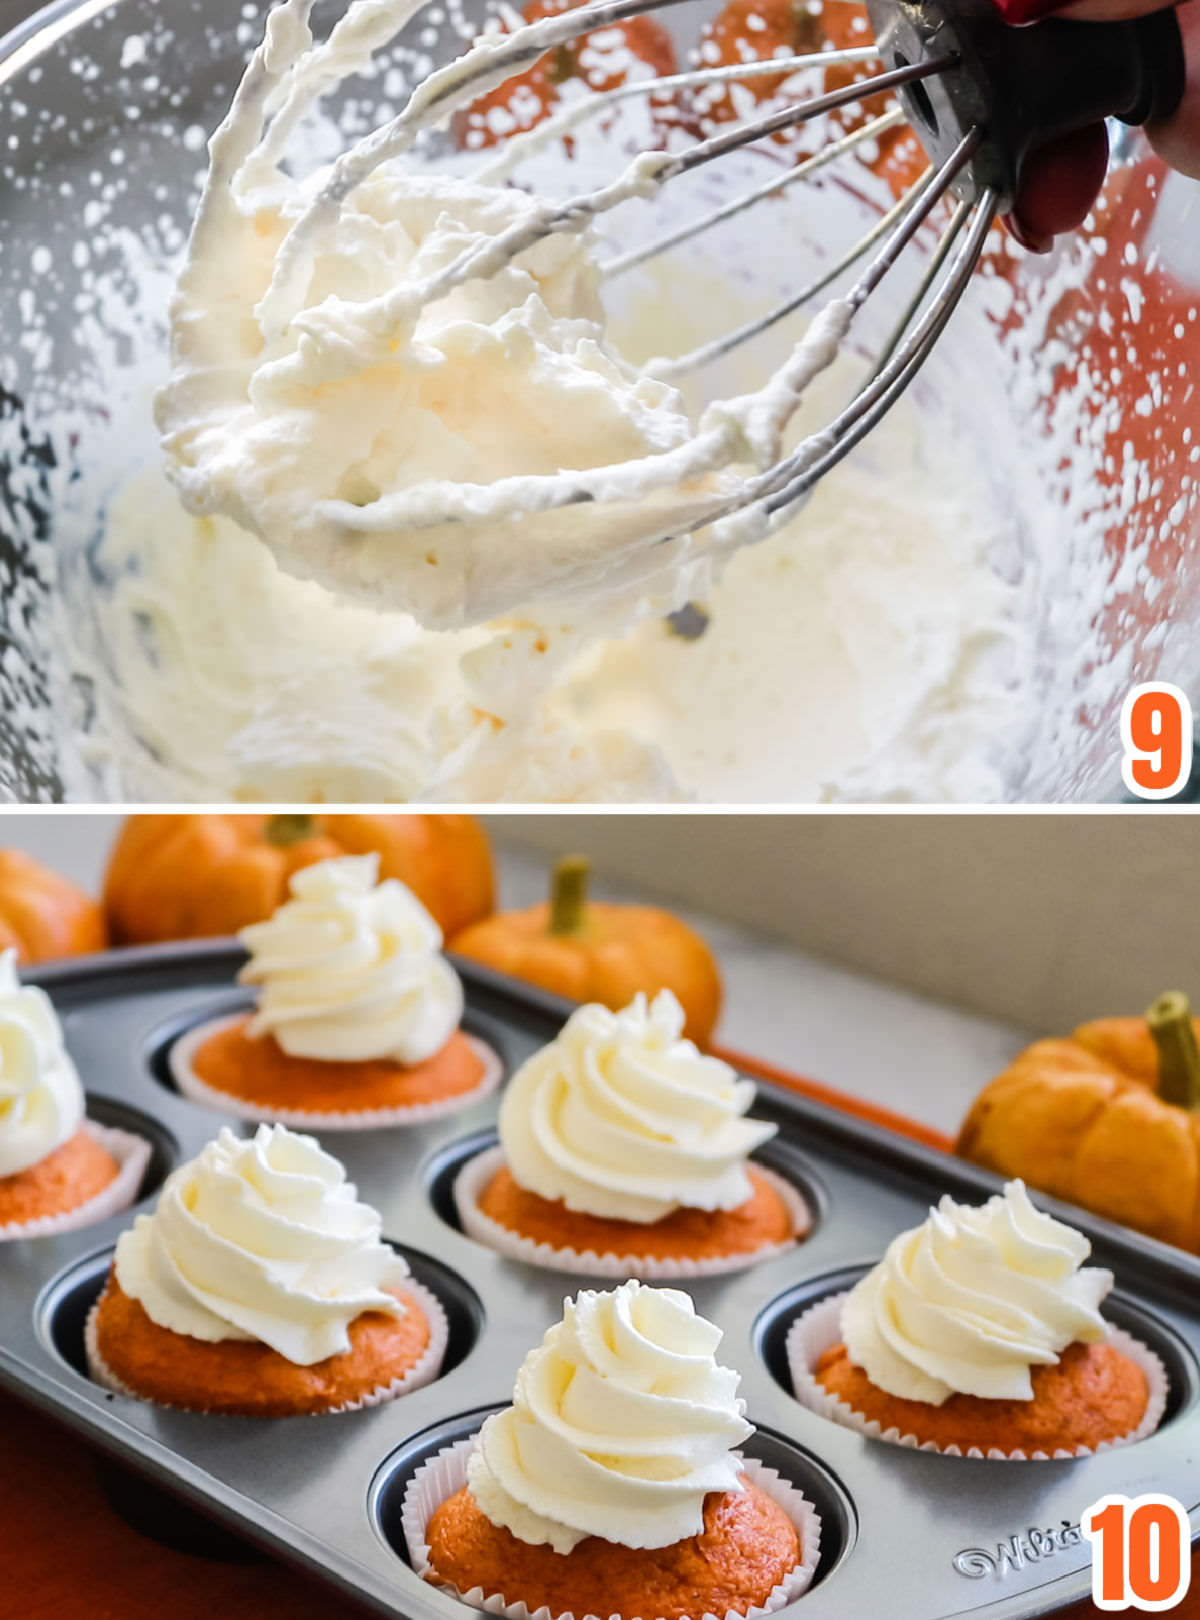 Collage image showing how to frost the Pumpkin Pie Cupcakes.